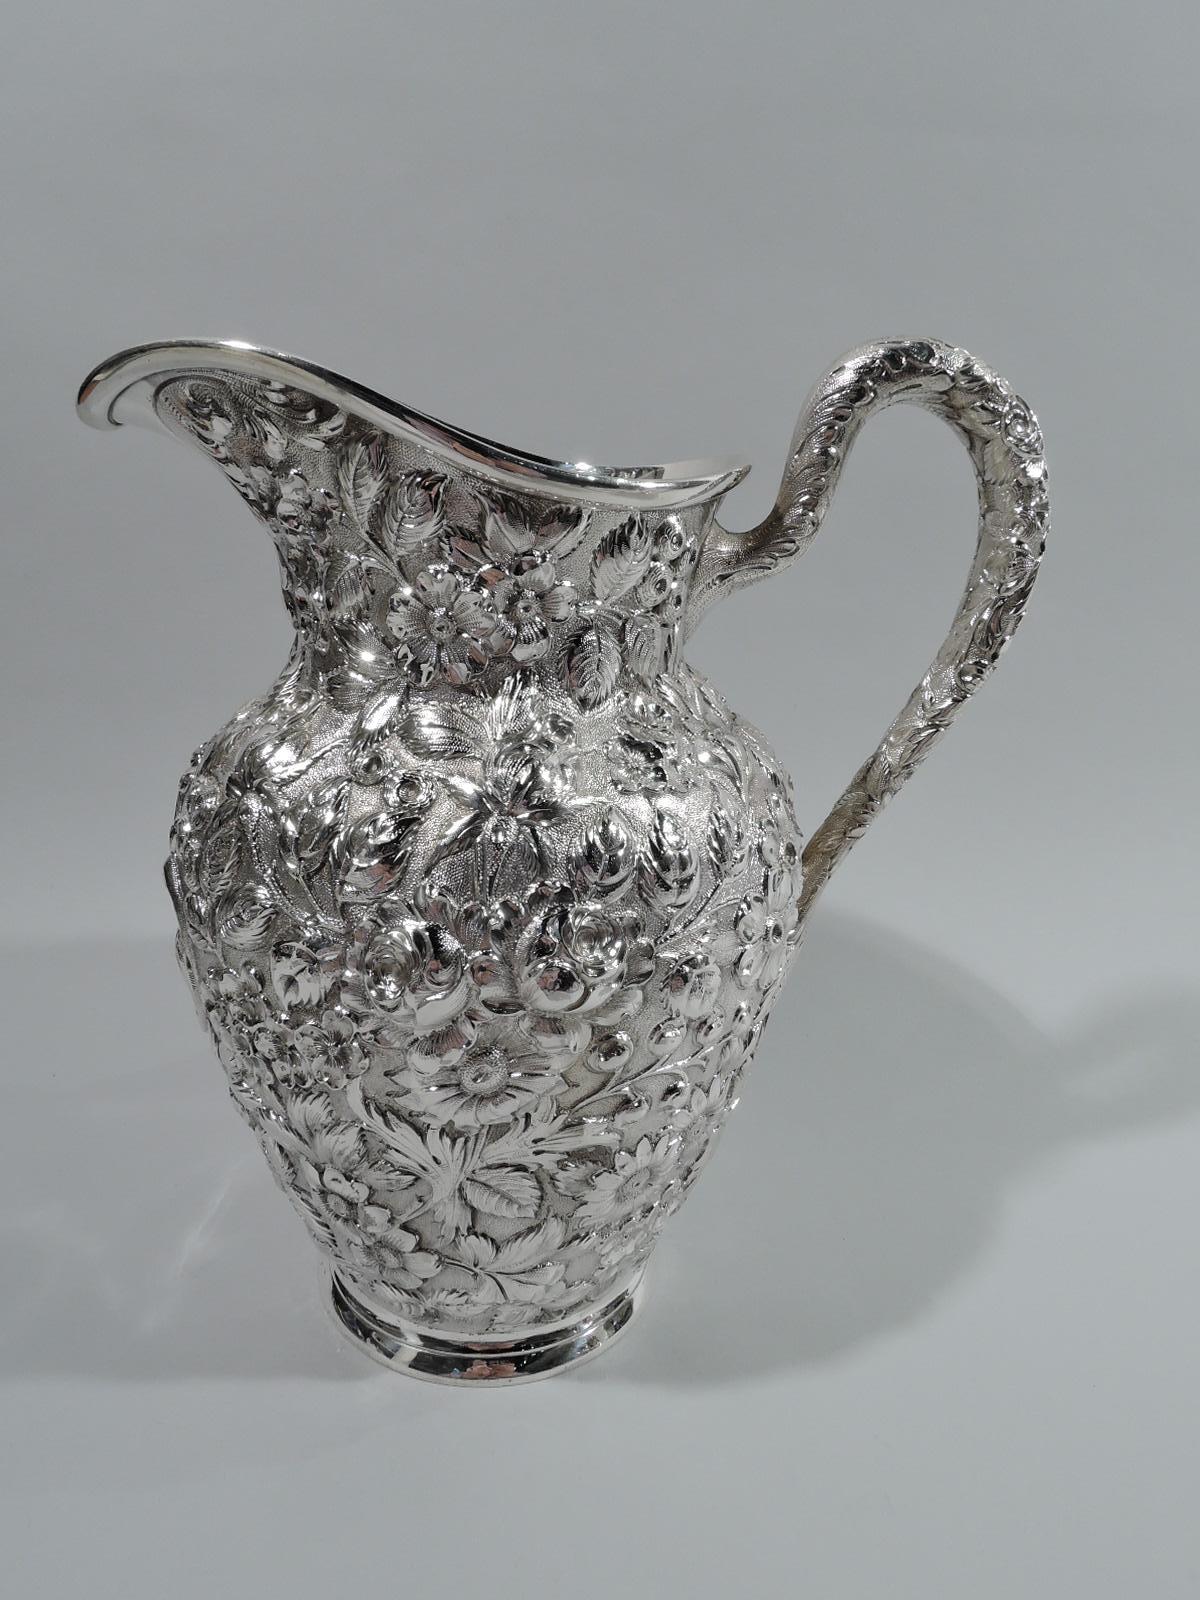 Victorian sterling silver drinks set. Made by AG Schultz & Co. in Baltimore, ca 1910. This set comprises 1 pitcher and 12 goblets. Pitcher has curved and tapering body, high-looping handle, and helmet mouth. Goblets have ovoid bowl on cylindrical